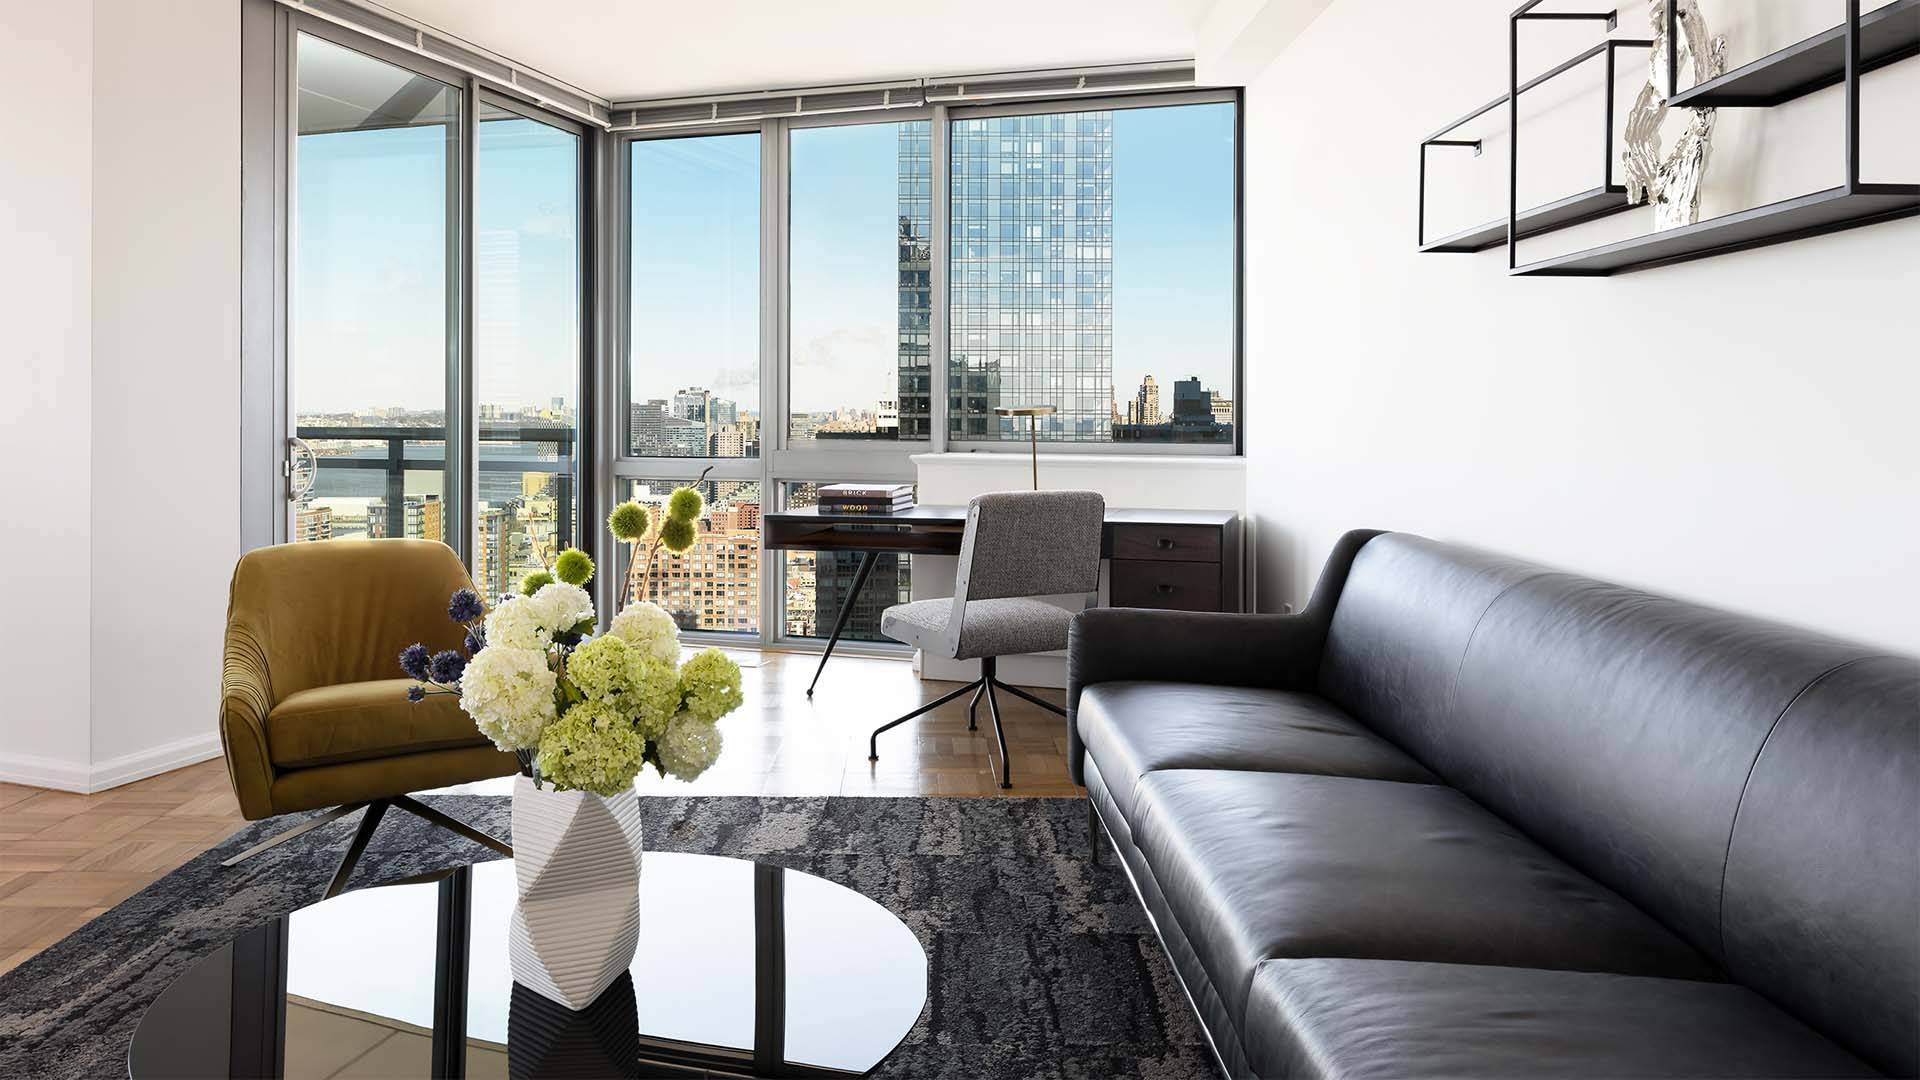 MASSIVE 1BR IN THE HUDSON YARDS WITH A PRIVATE BALCONY & NORTHERN EXPOSURE!